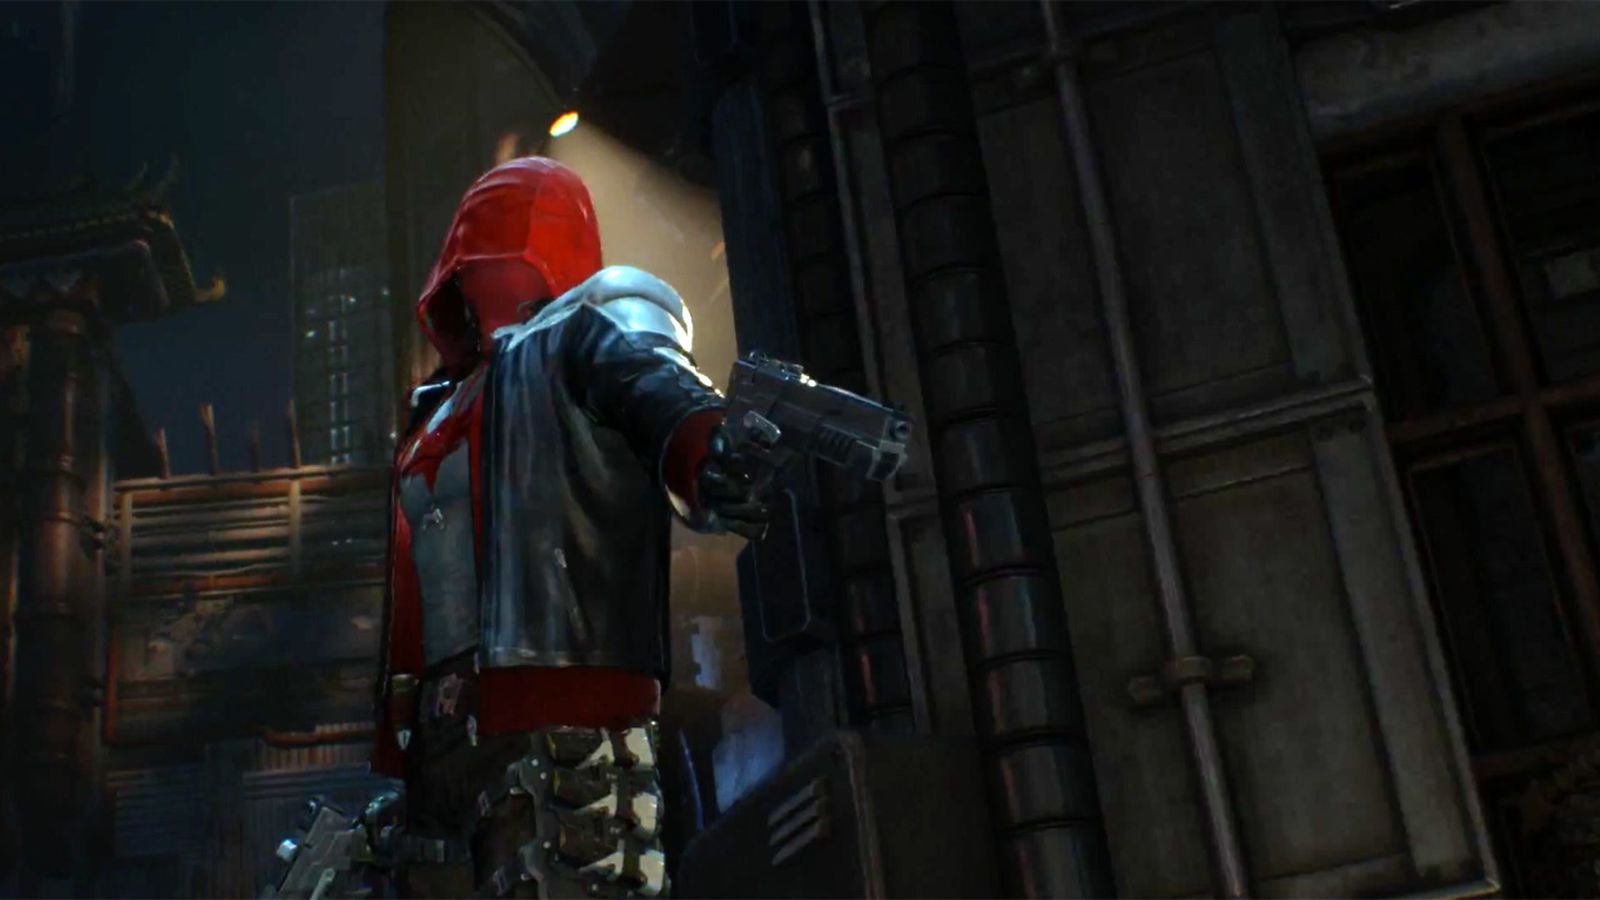 Here's a peek at Batman: Arkham Knight's Red Hood in action